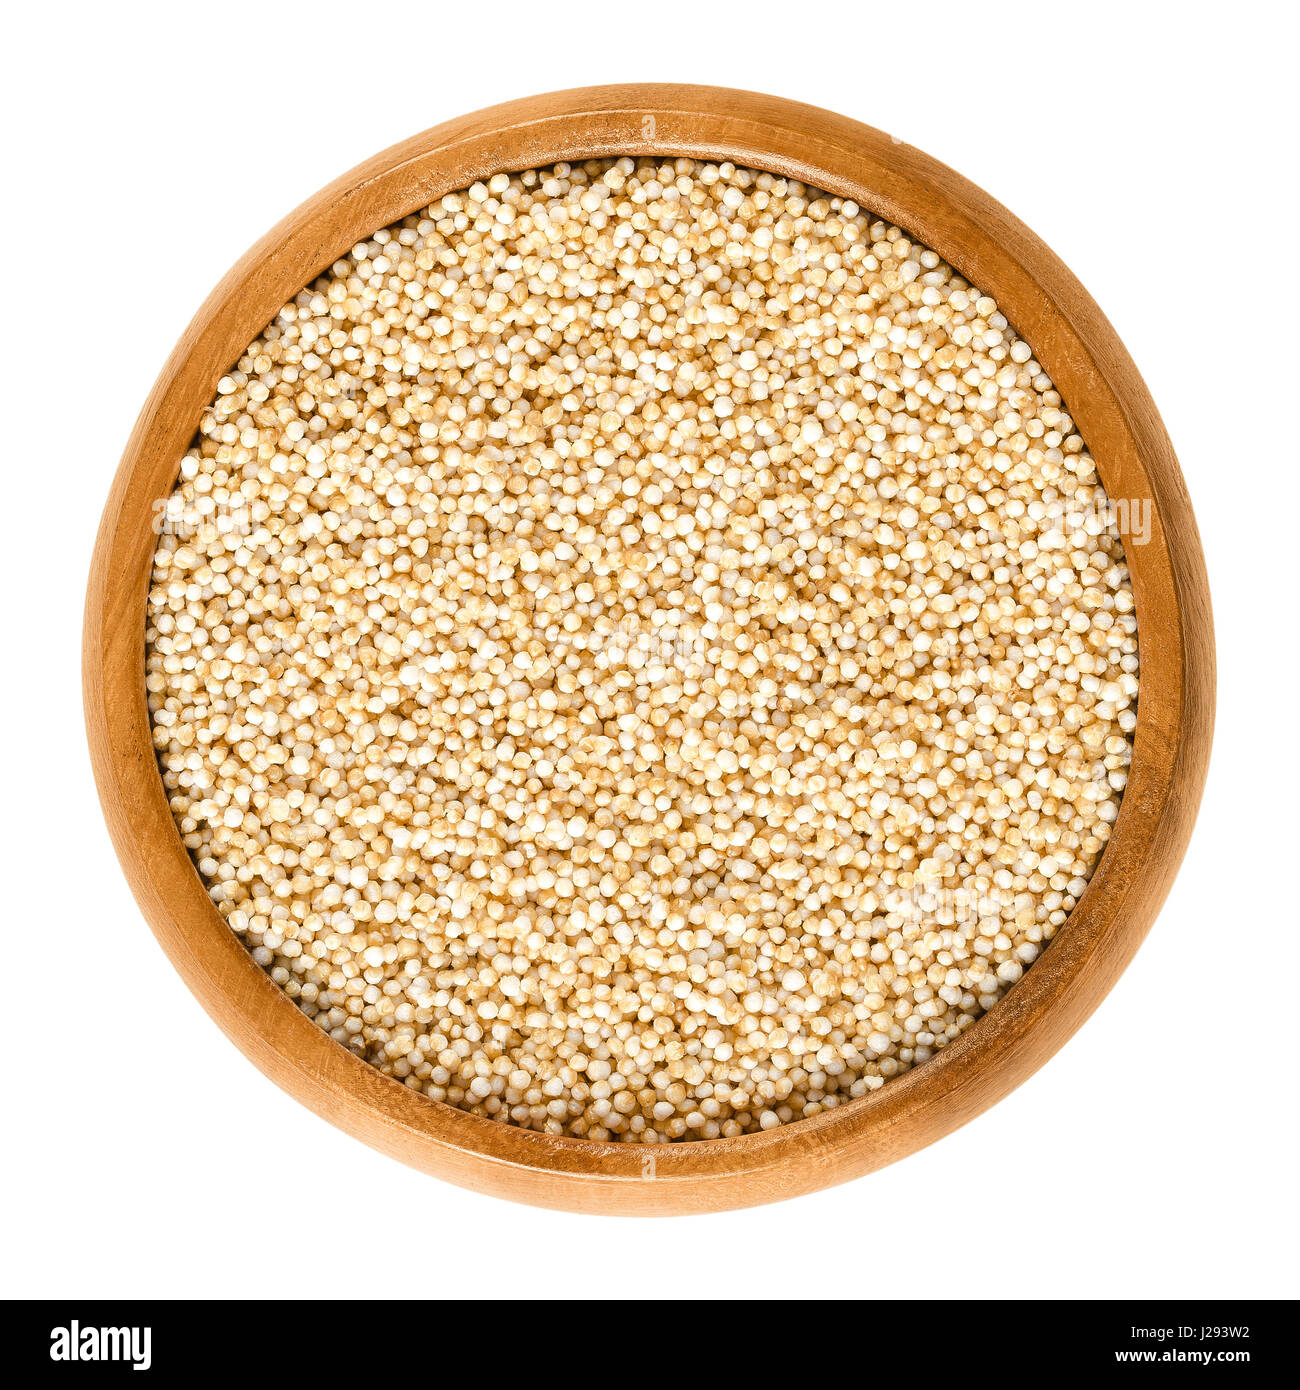 Puffed amaranth in wooden bowl. Popped grains of Amaranthus. Pseudocereal and rediscovered healthy staple food of the Aztec. Breakfast cereal. Stock Photo